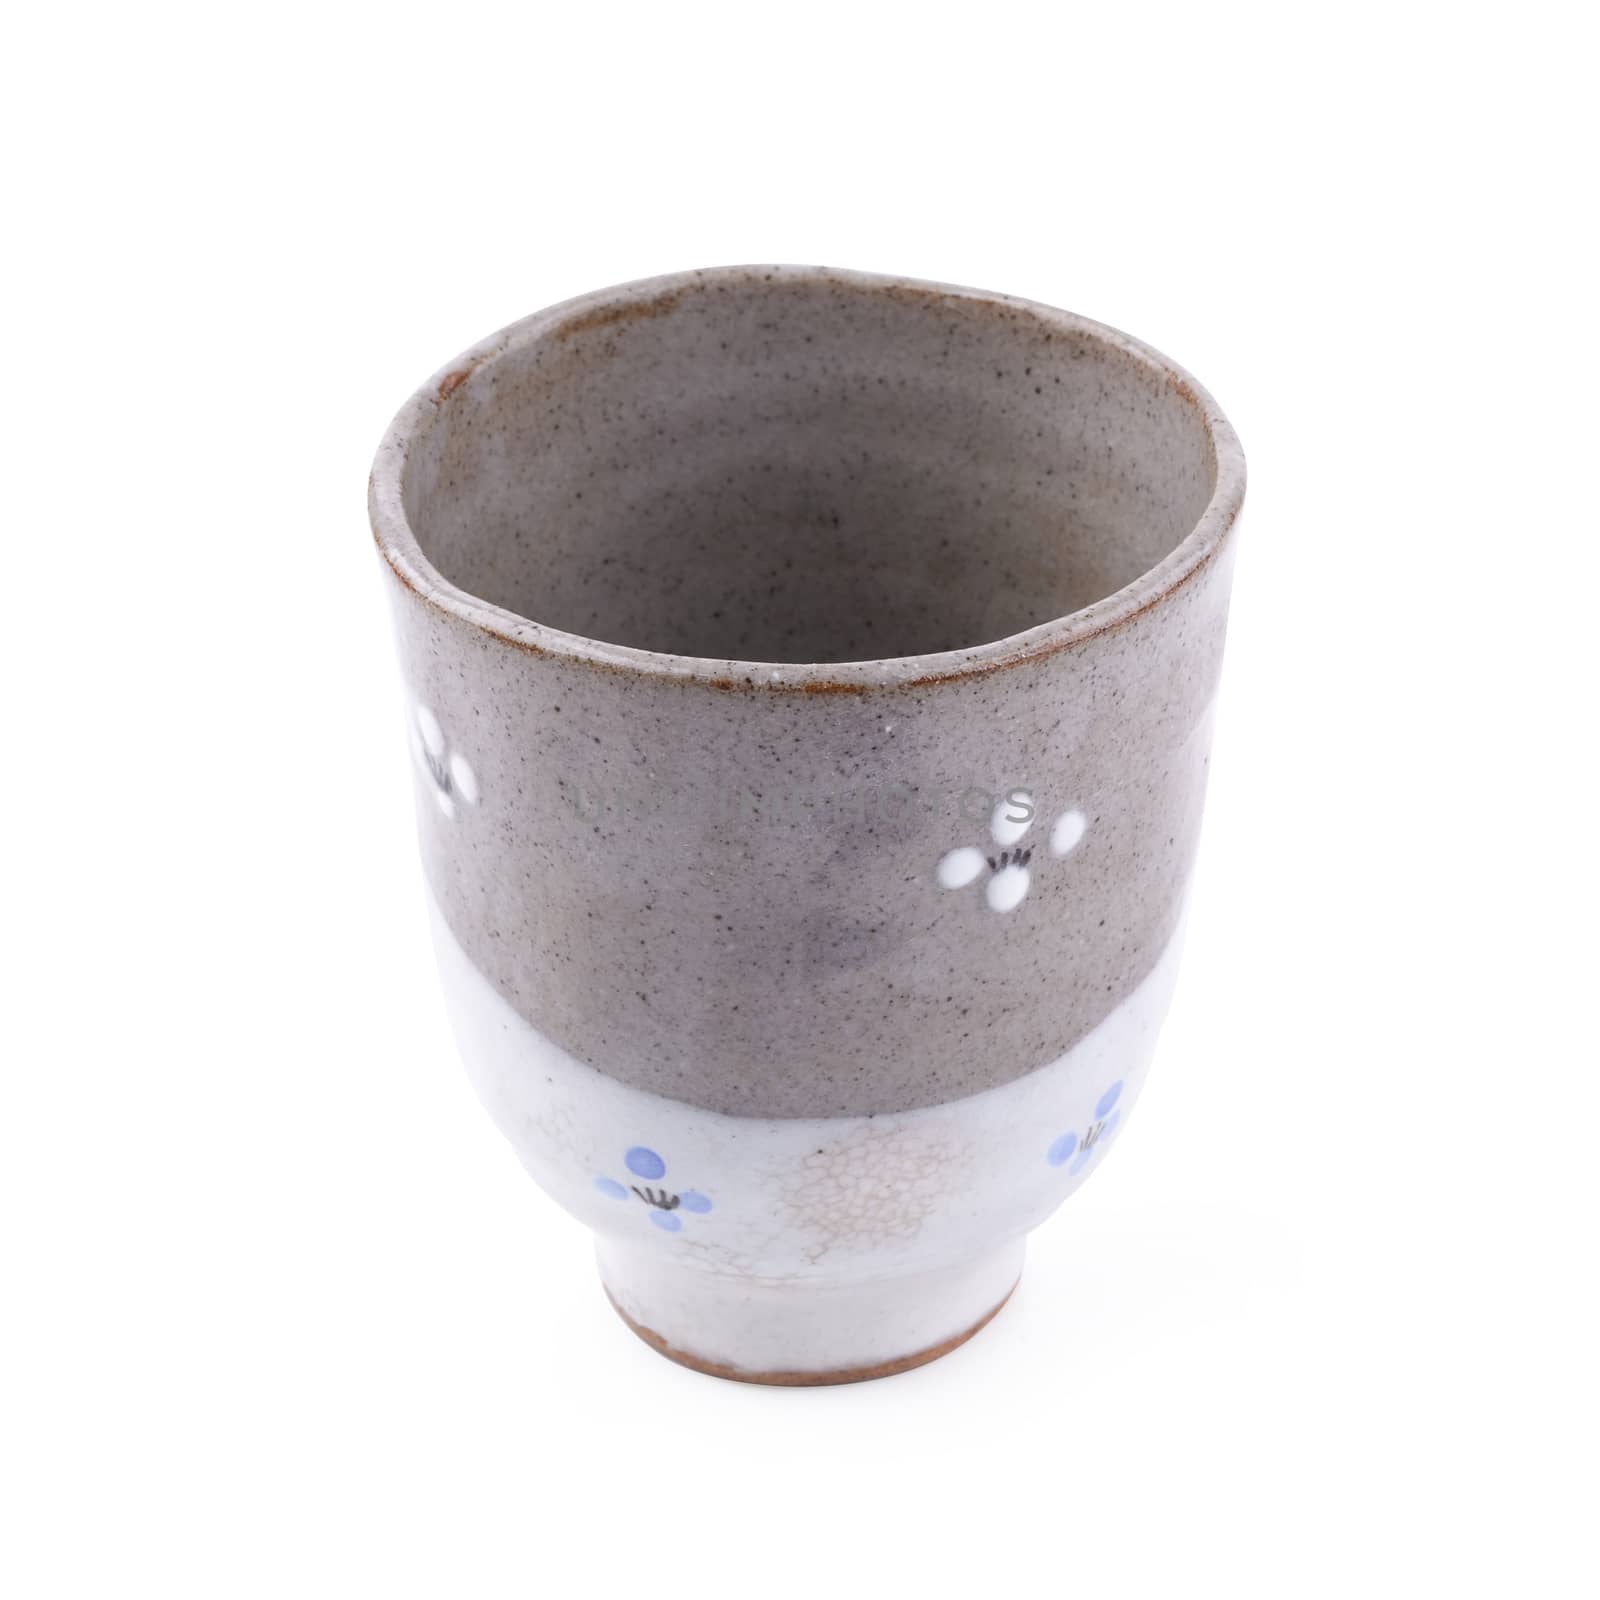 Ceramic black cup isolated on a white background by kaiskynet